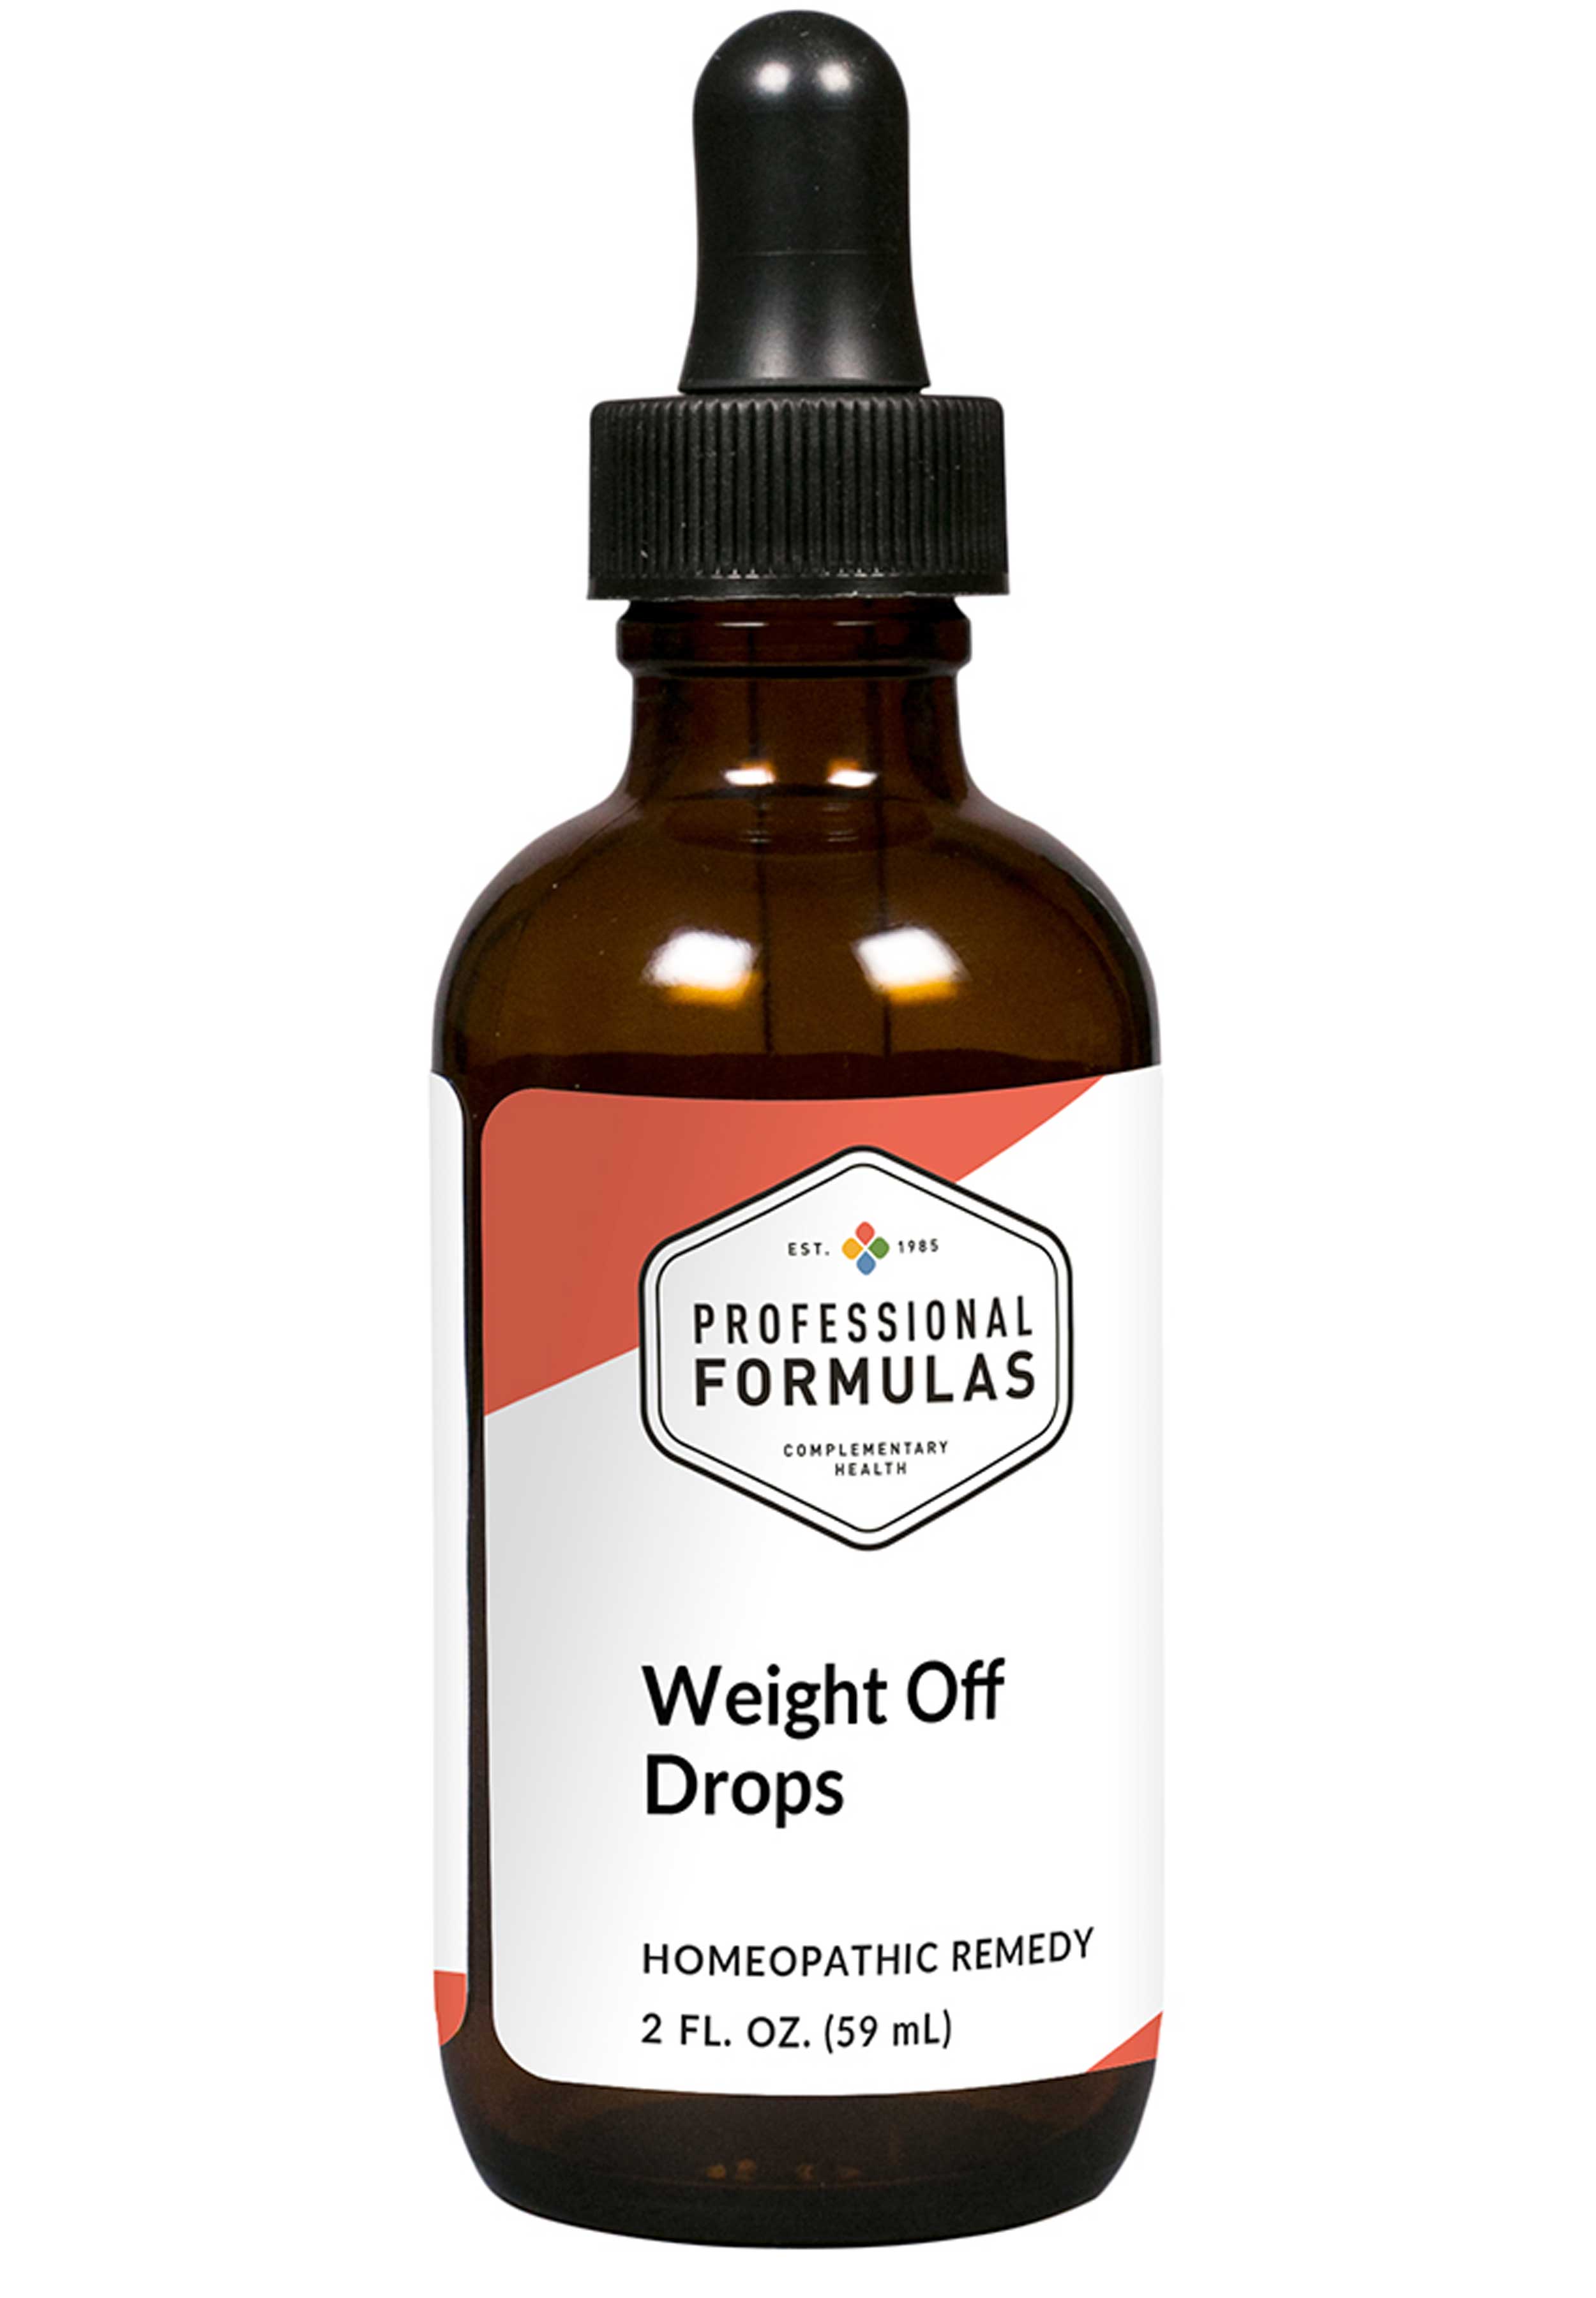 Professional Formulas Weight Off Drops